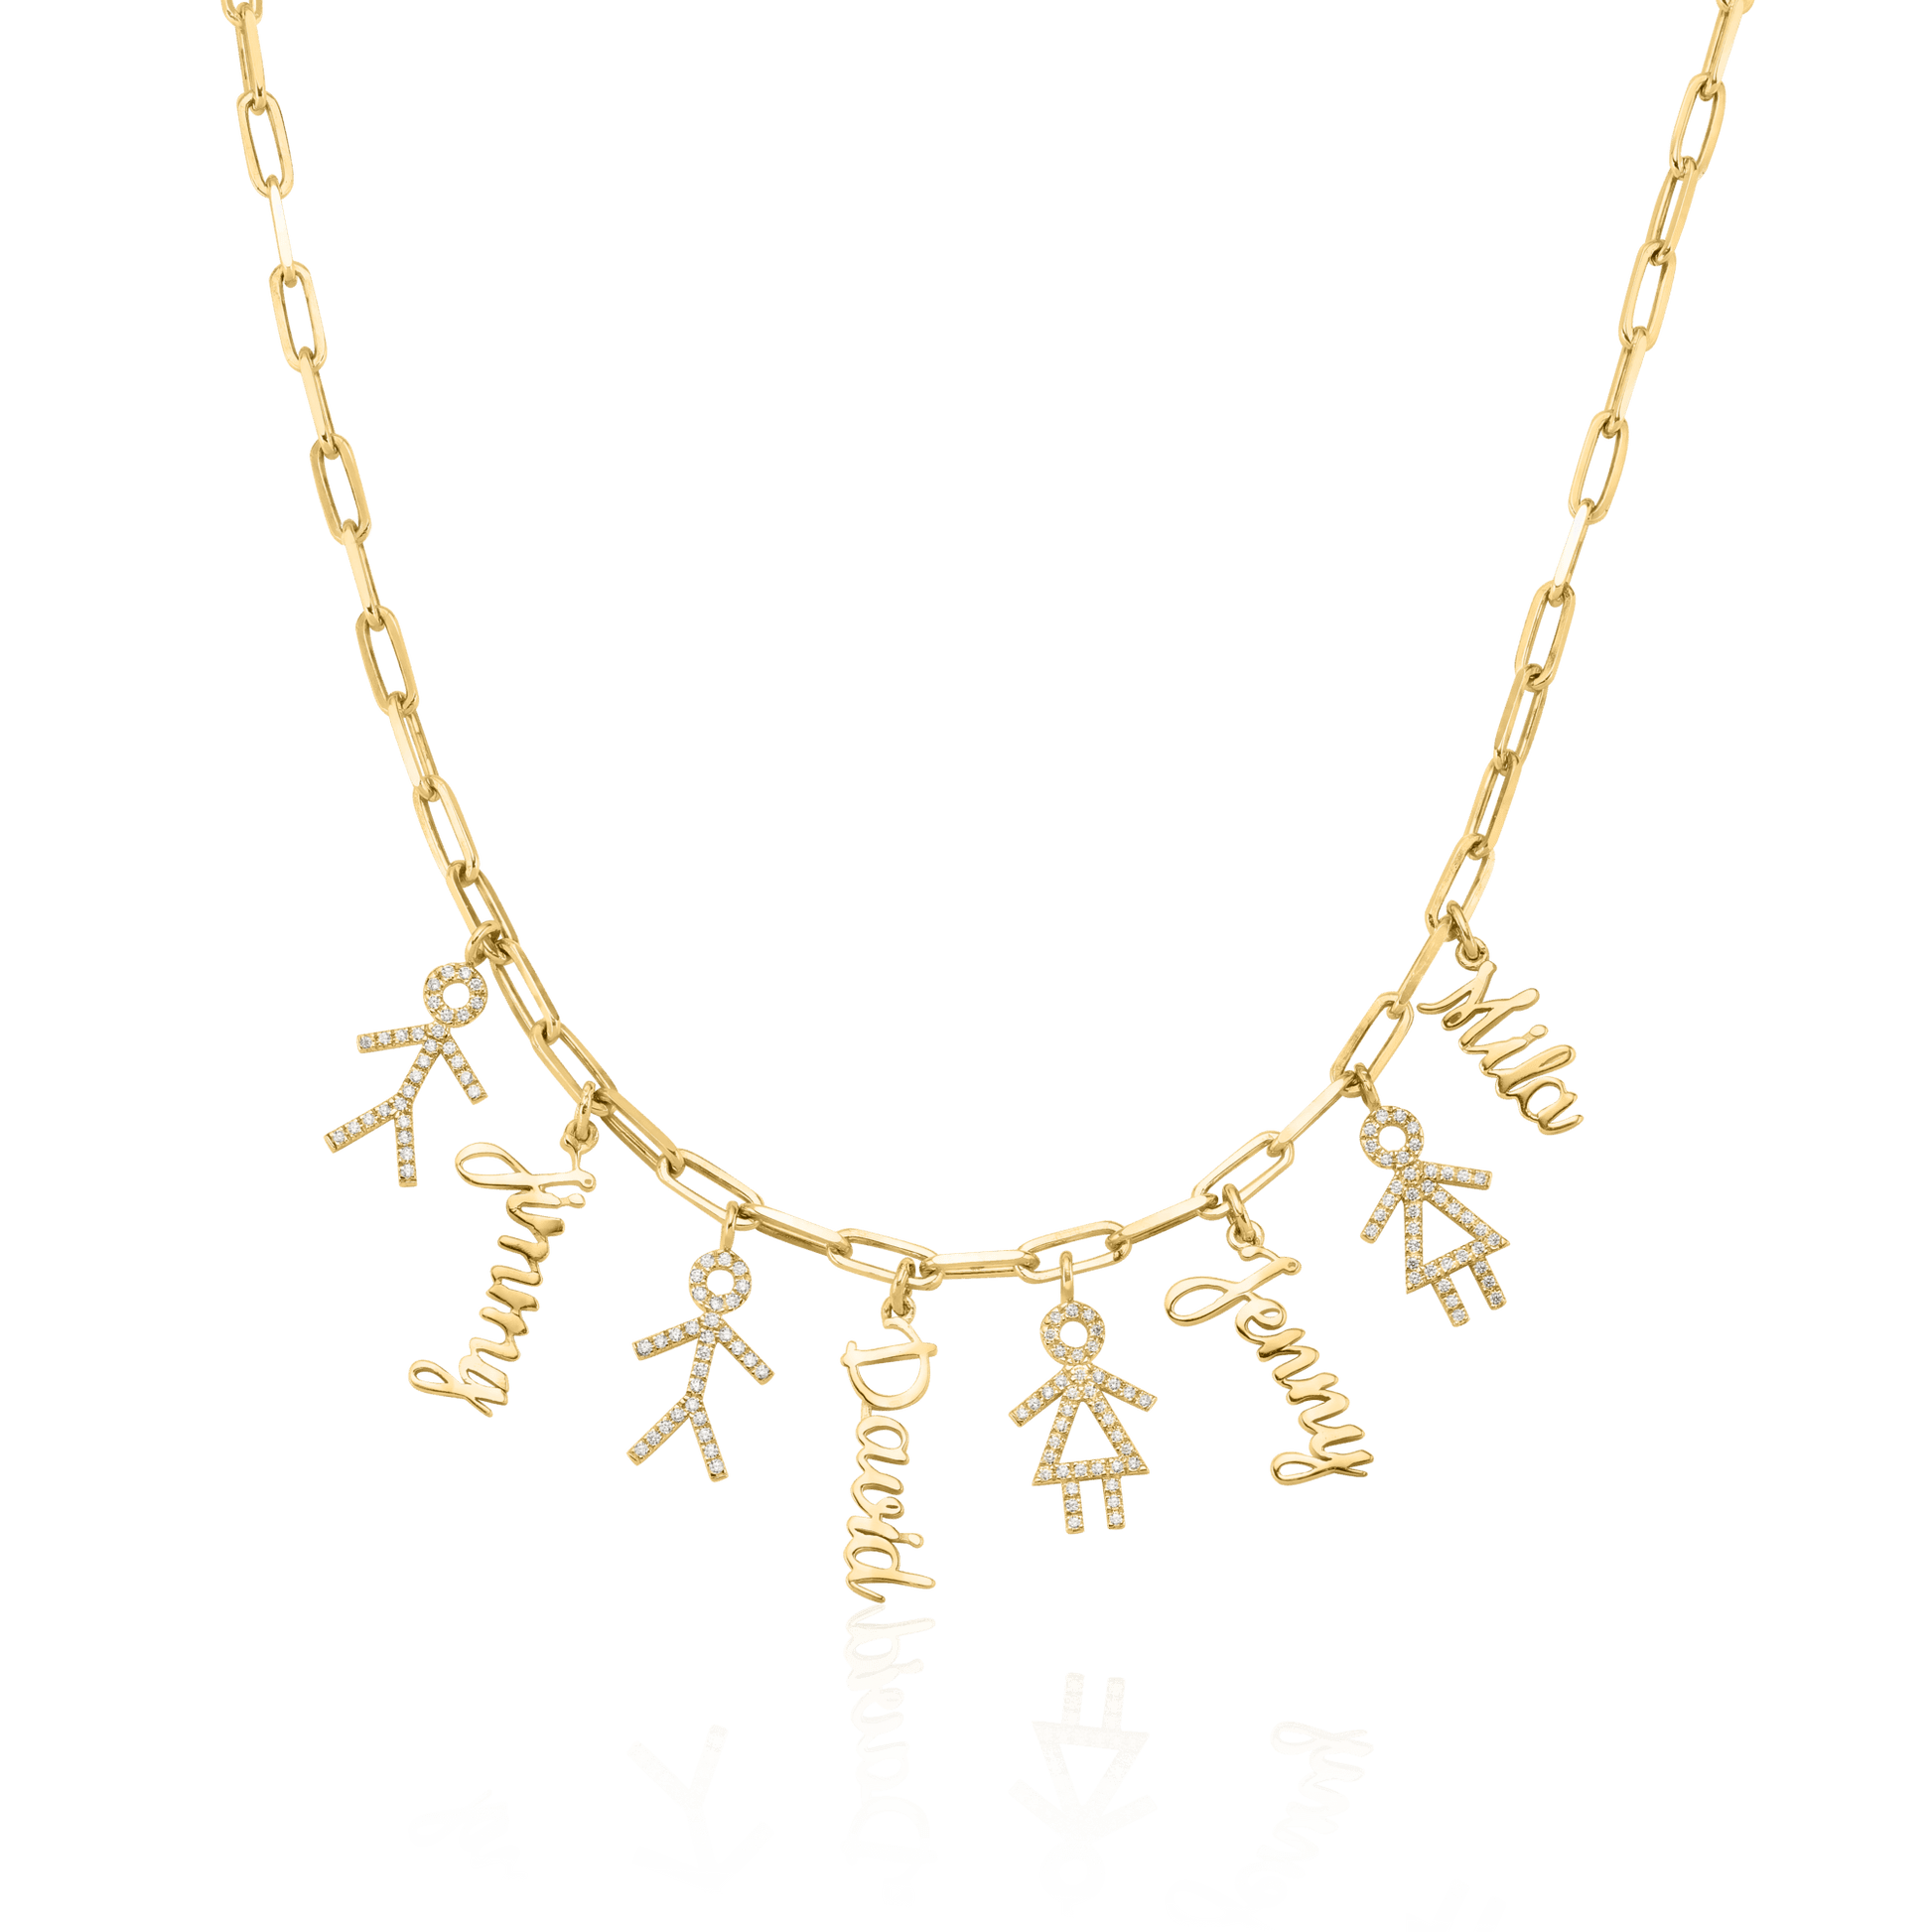 Kith & Kin Necklace - 18K Gold Vermeil Necklaces Gold Vermeil Natural White Sapphire 1 Kid + 1 Name Small - 16 Inches (40cm)